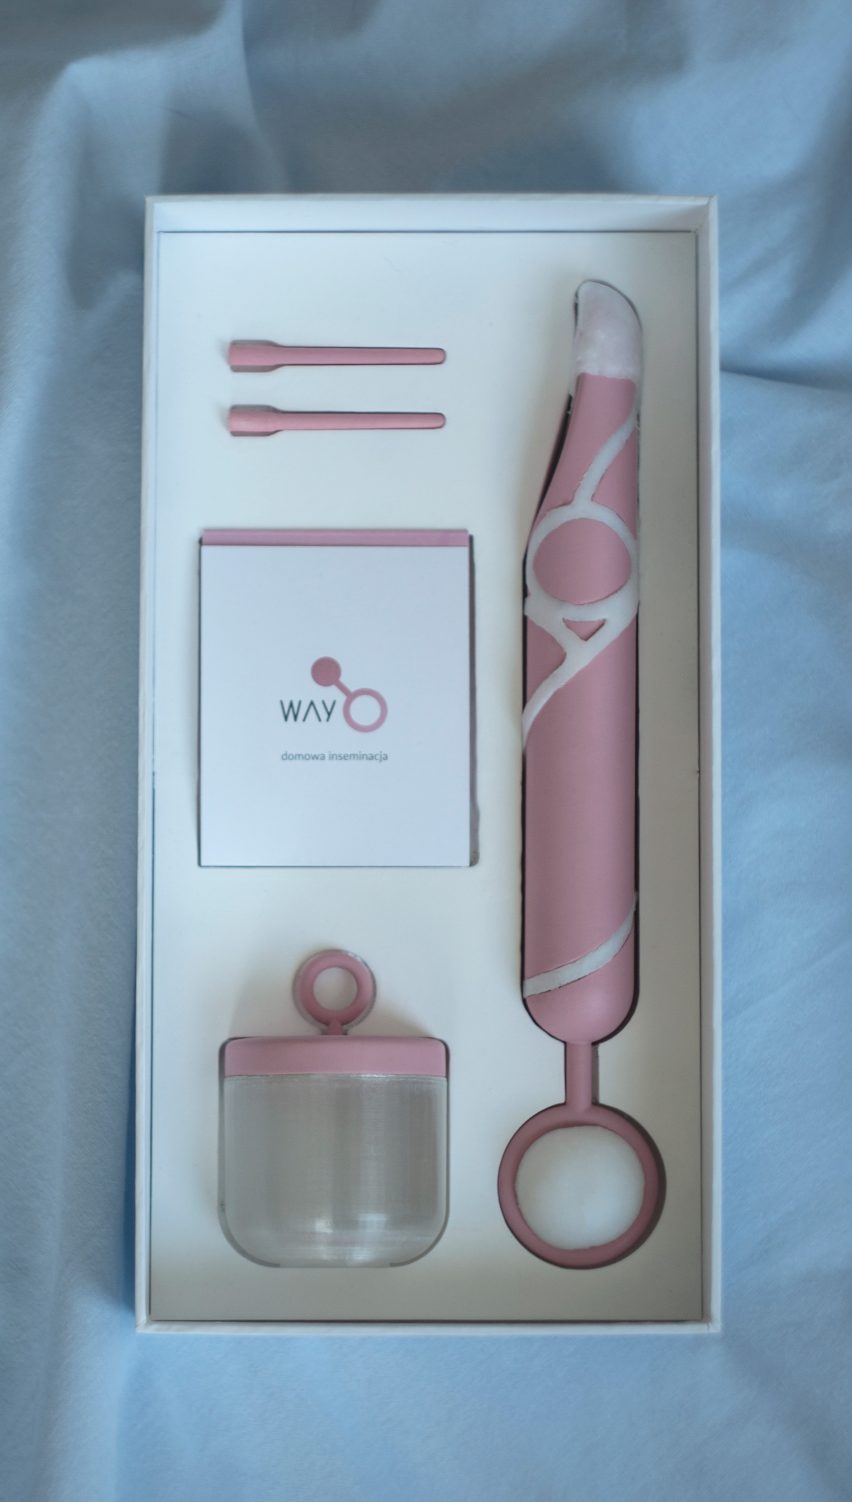 Kamila Rudnicka designs home insemination kit for use as part of sex